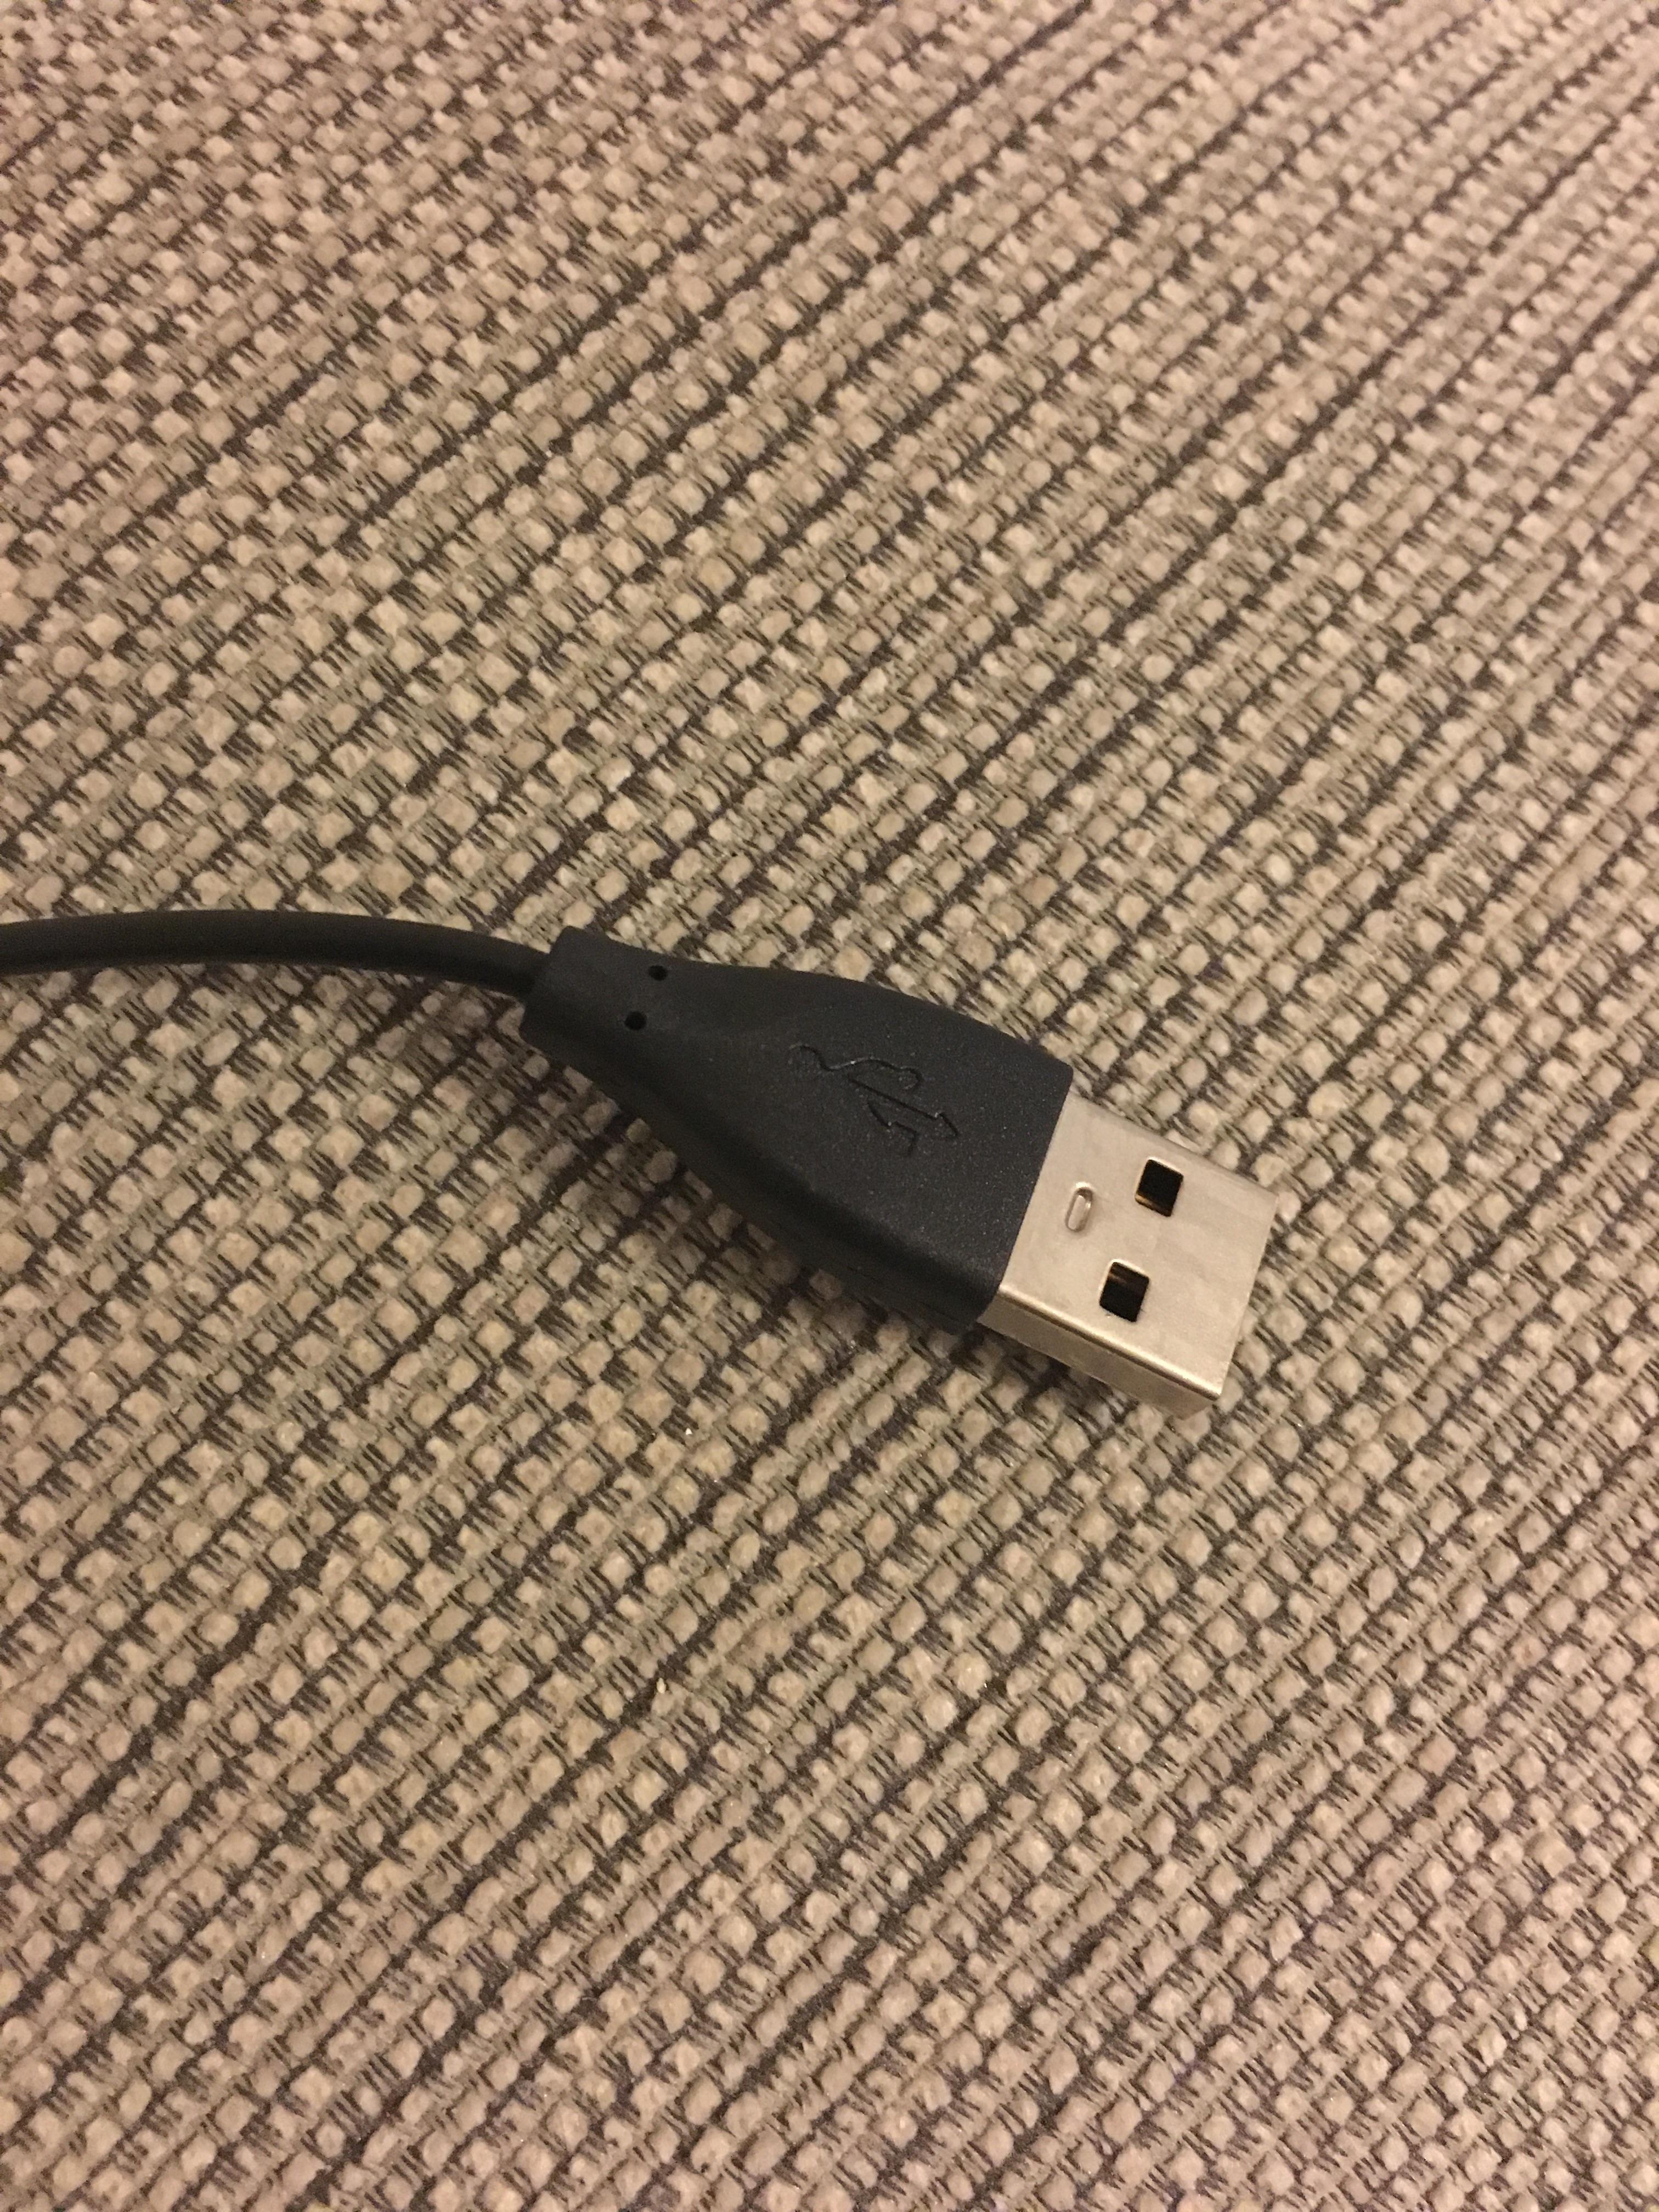 restart fitbit charge 3 without cable